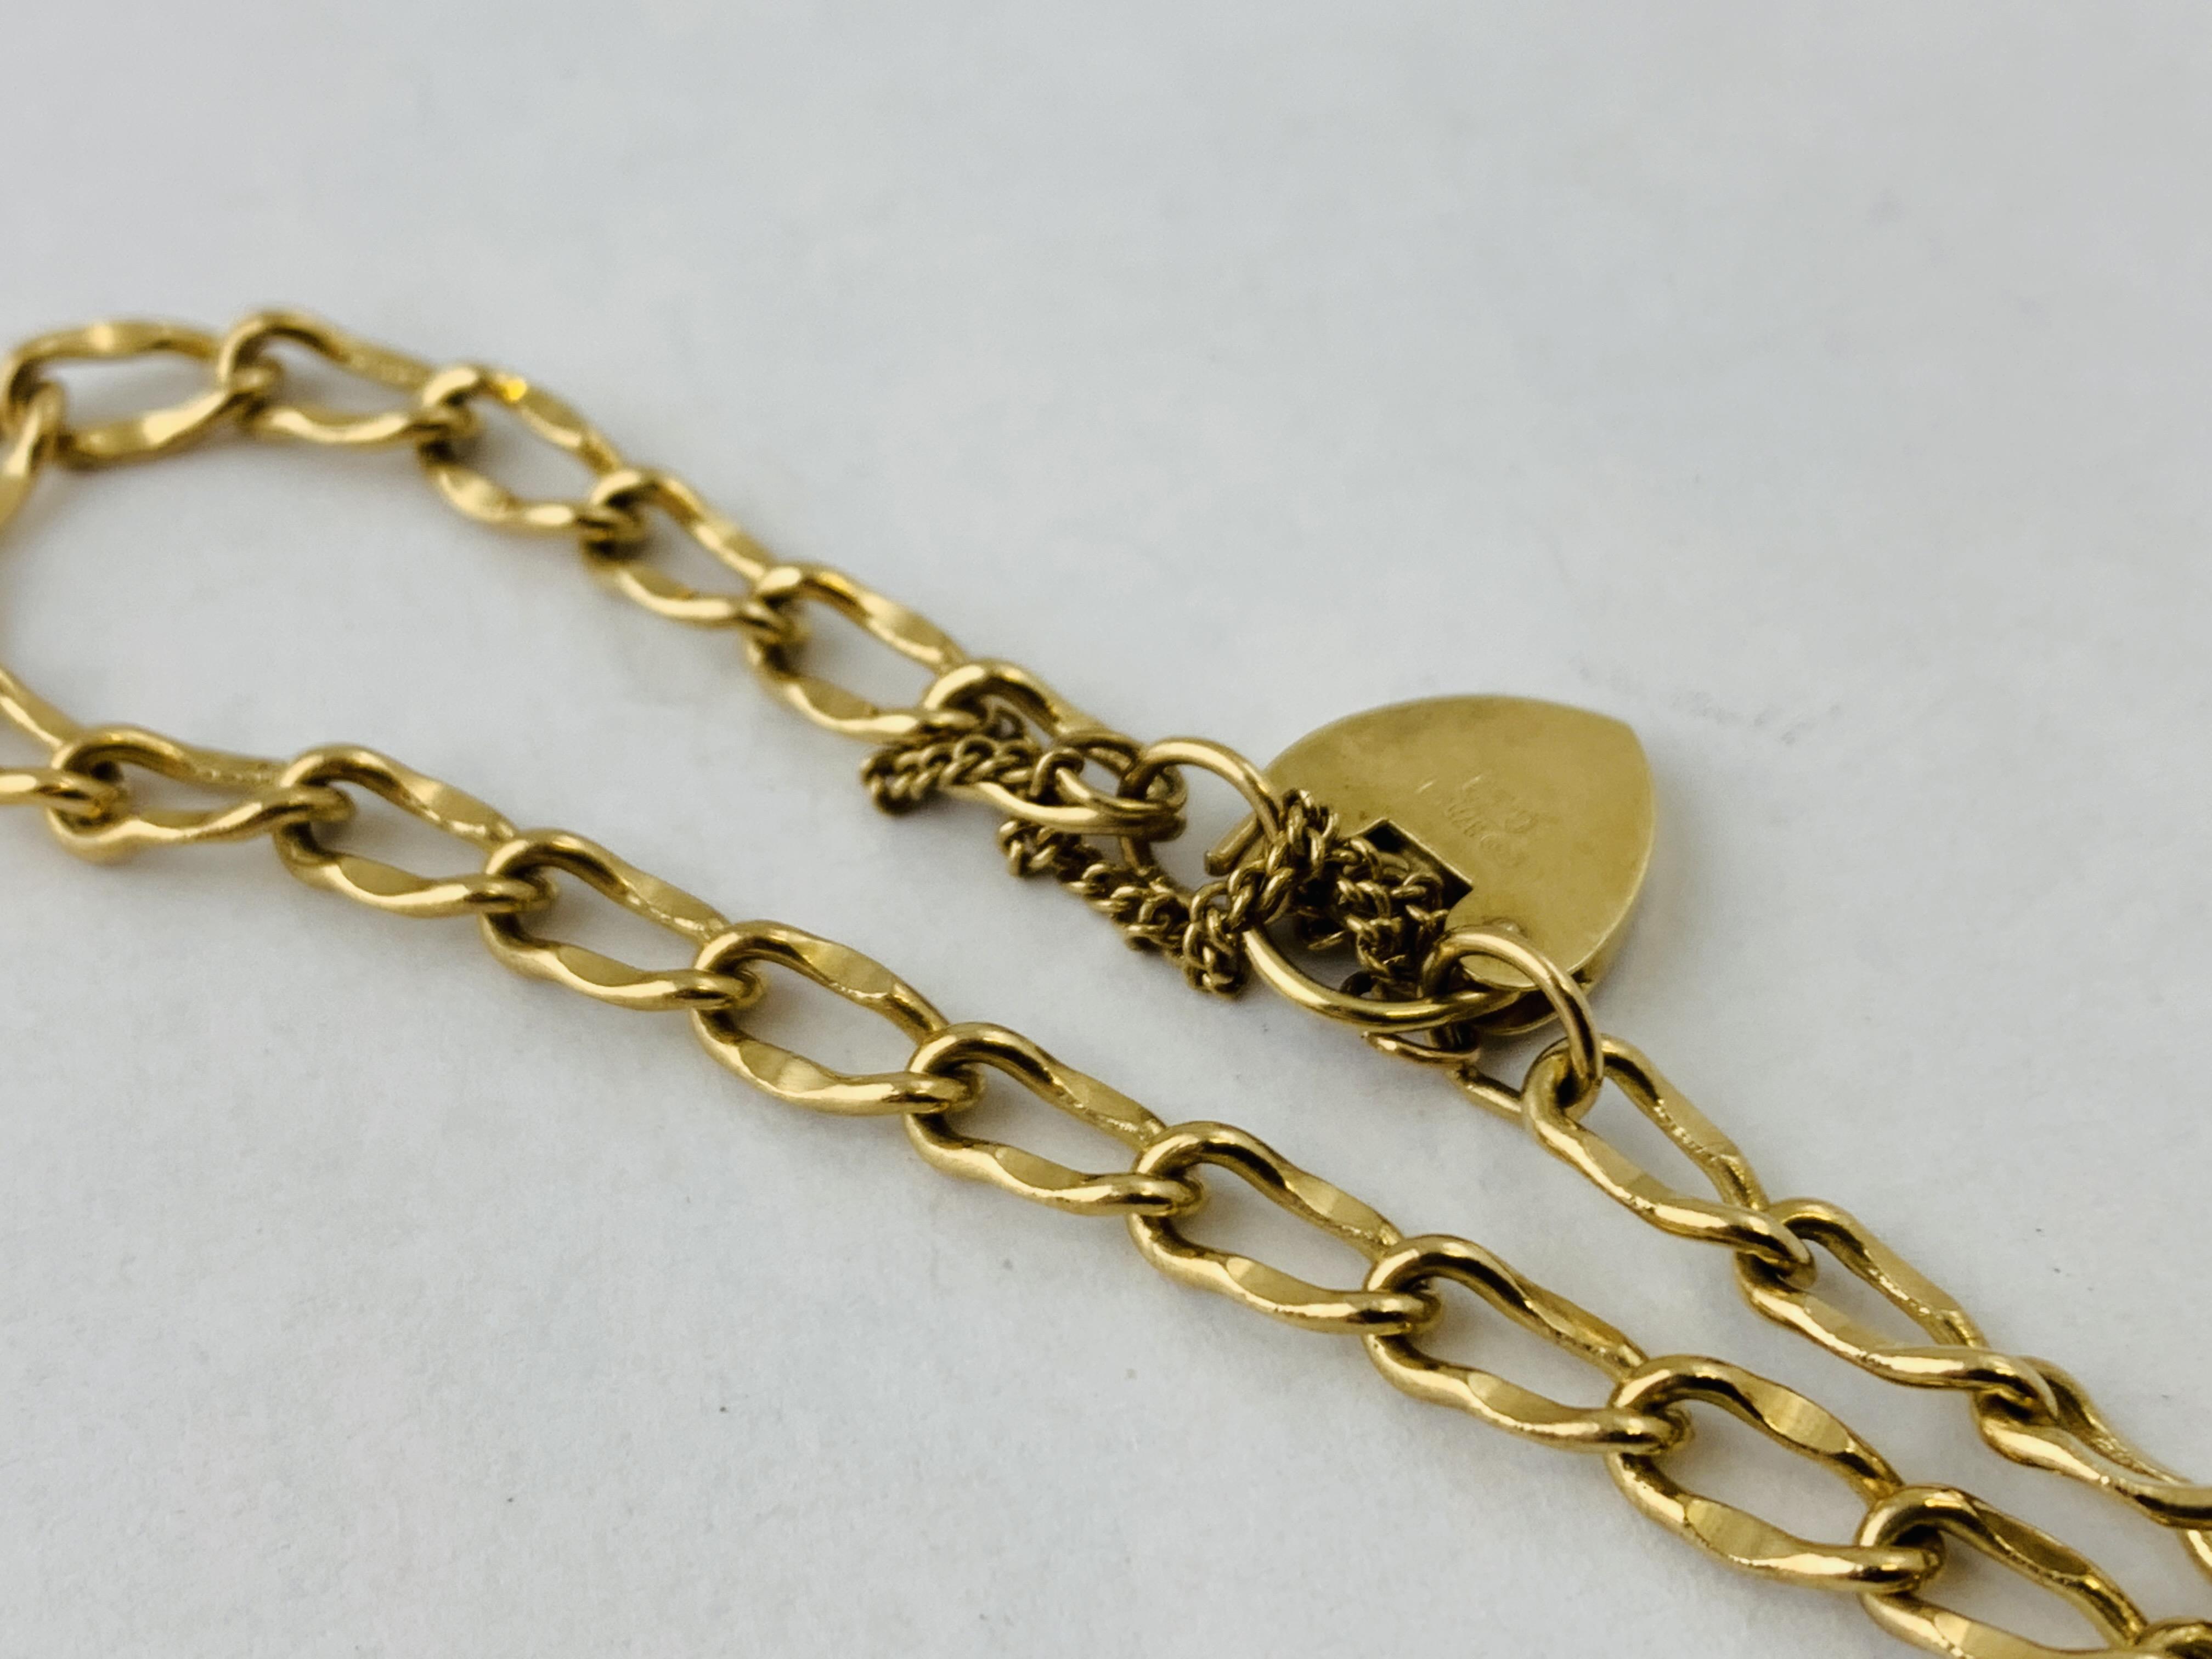 A 9CT GOLD BRACELET WITH HEART SHAPED PADLOCK CLASP AND YELLOW STONE SET PENDANT ATTACHED L 200MM - Image 3 of 9